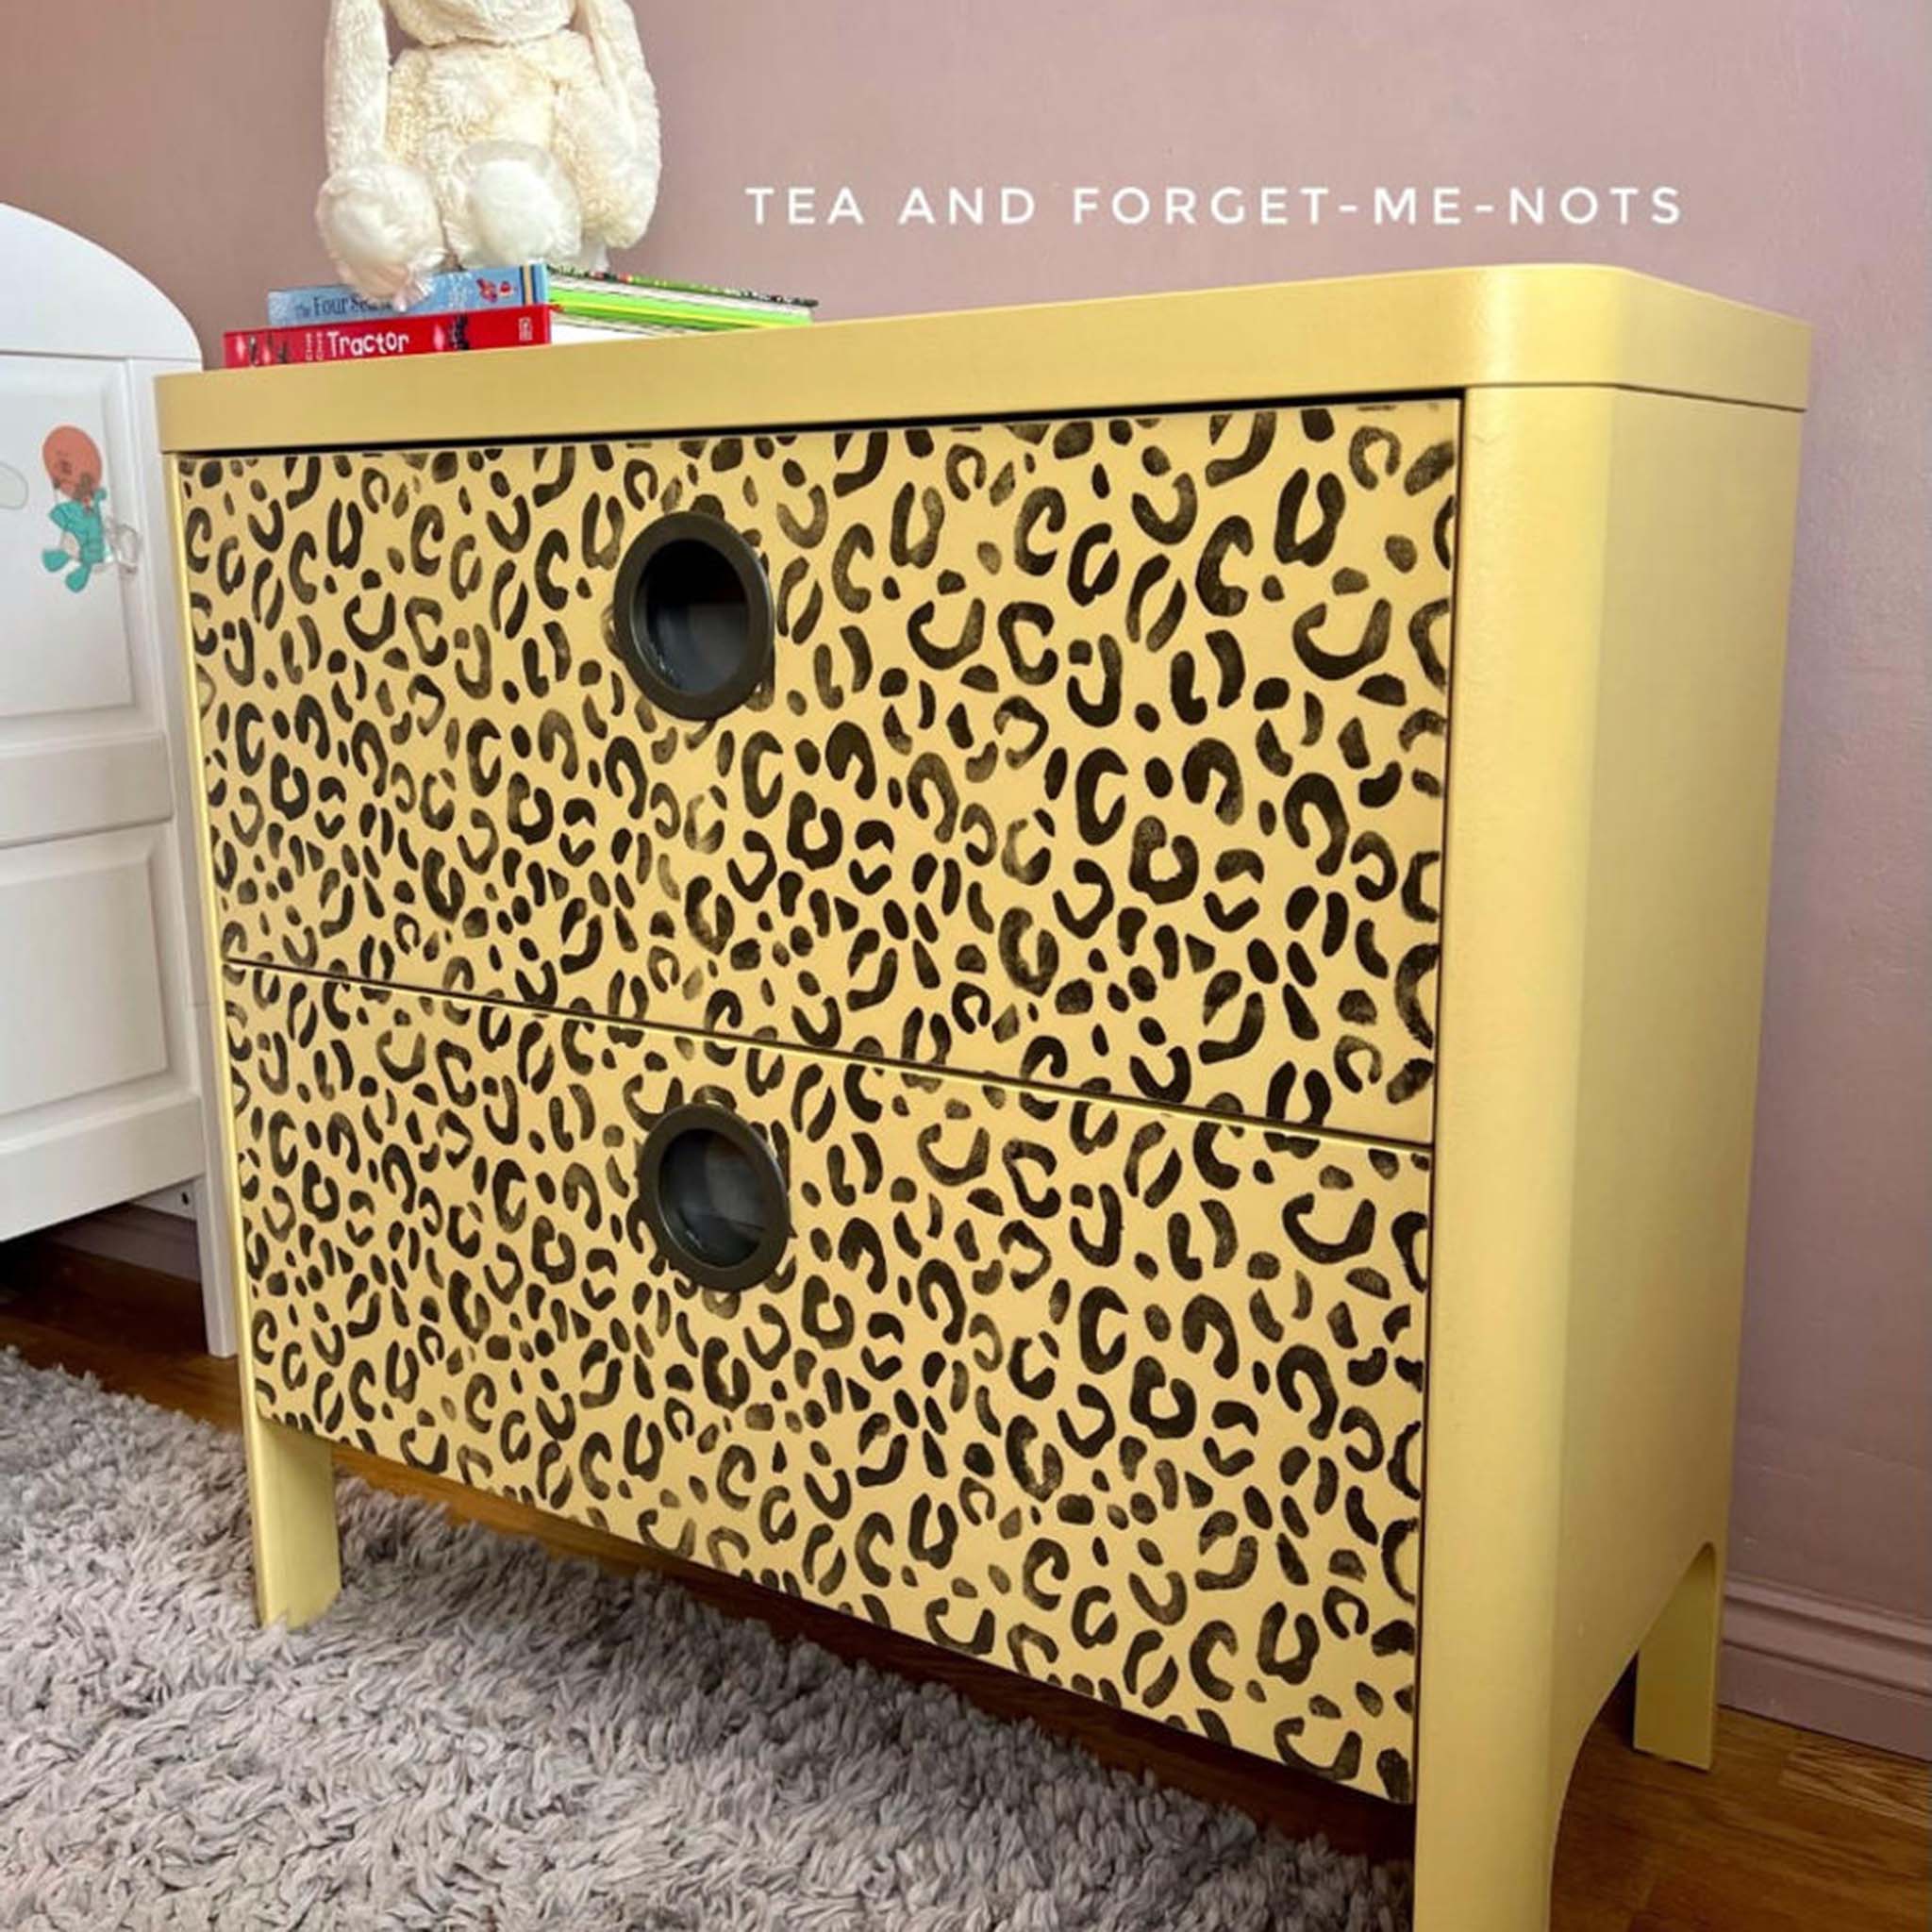 A 2-drawer small dresser refurbished by Tea and Forget-Me-Nots is painted pale yellow and features the cheetah print in black of Belles & Whistles Safari mylar stencil on the drawers.